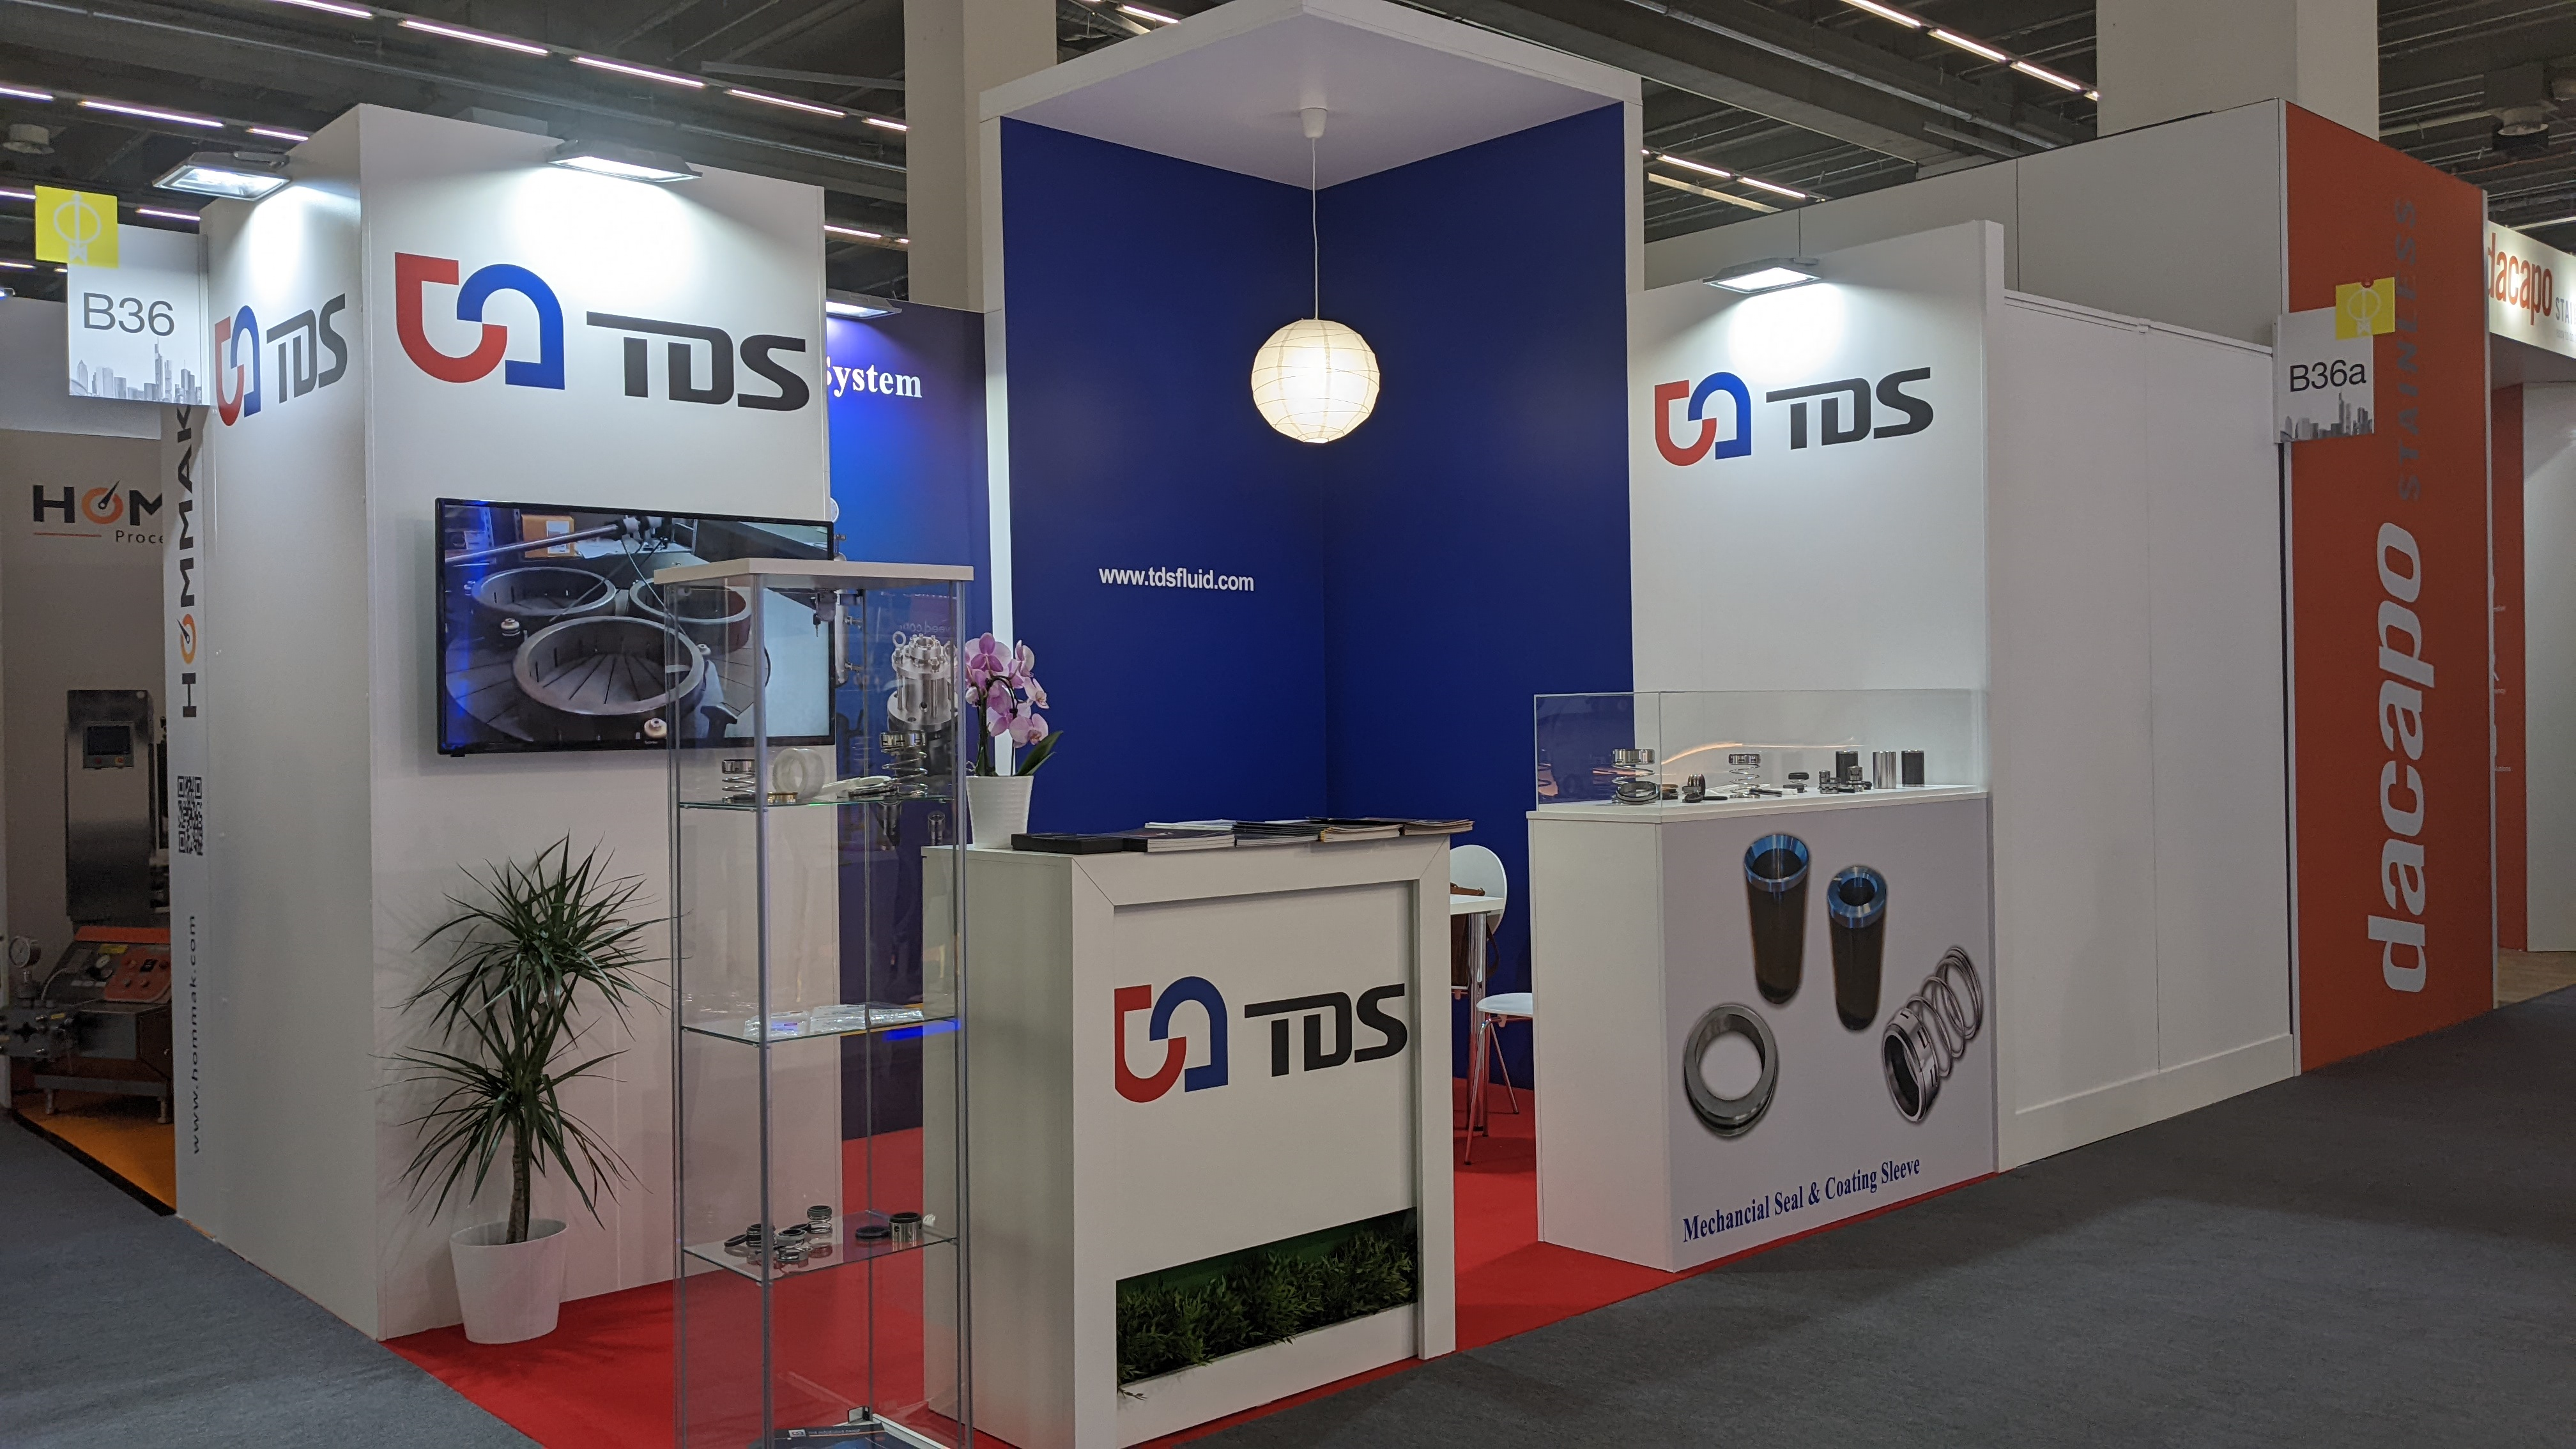 TDS American took part in the PROCESS EXPO in Chicago in Sep 2015